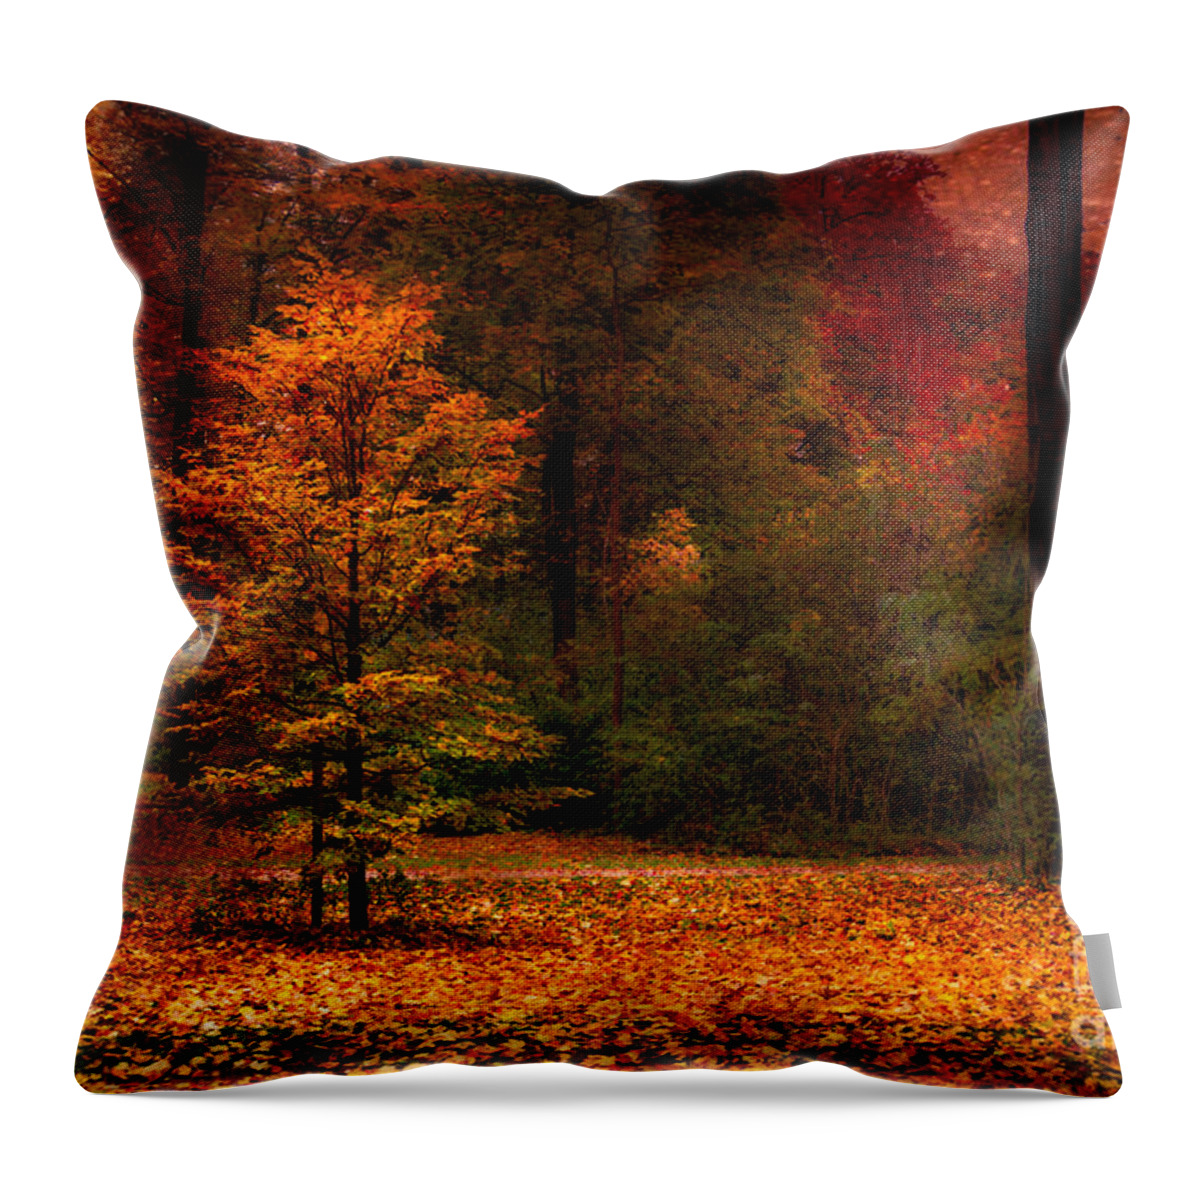 Autumn Throw Pillow featuring the photograph Youth by Hannes Cmarits